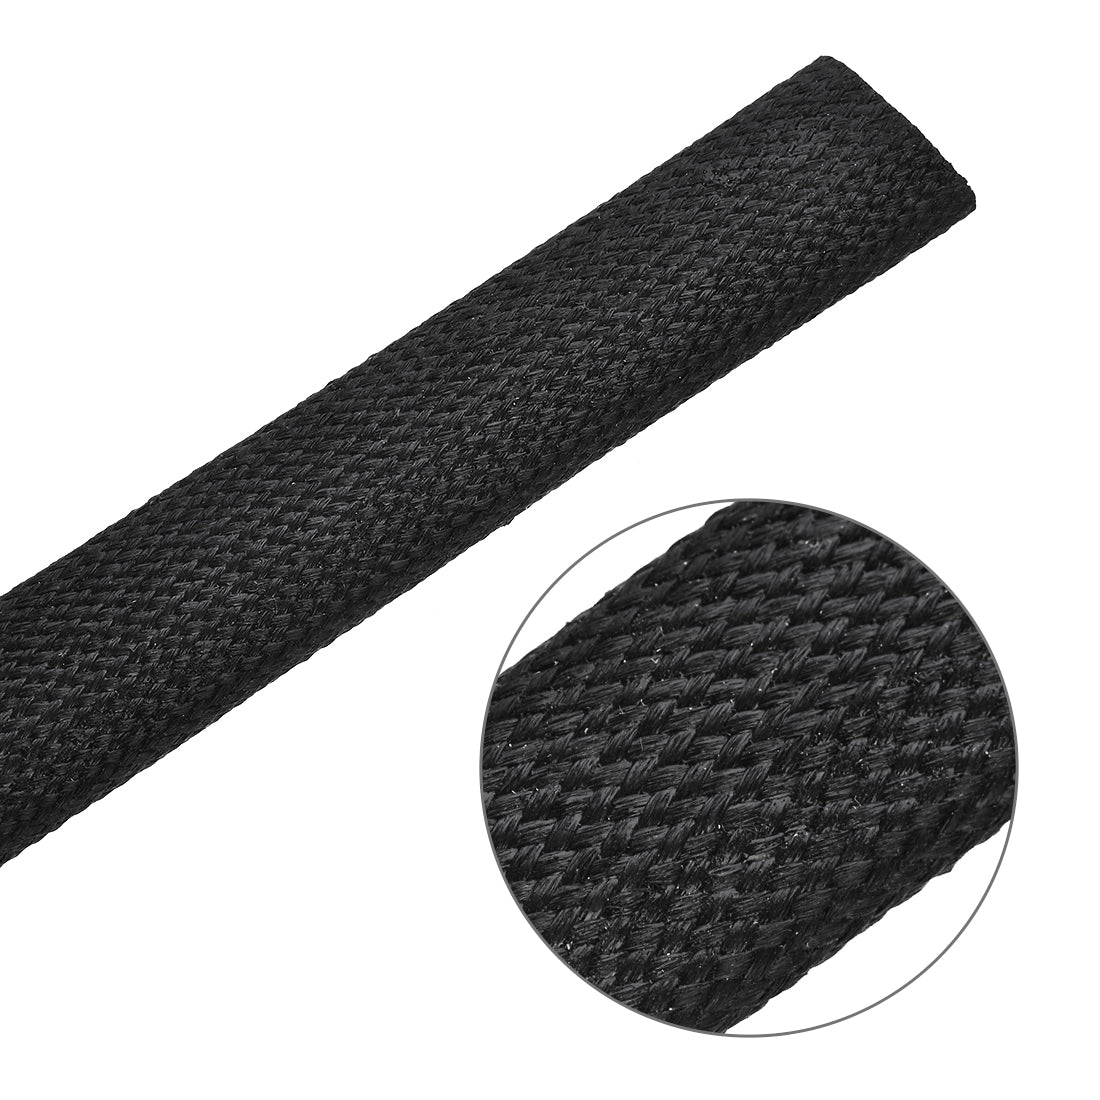 uxcell Uxcell Insulation Cable Protector,3.3Ft-16mm High TEMP Silicone Fiberglass Sleeve Black